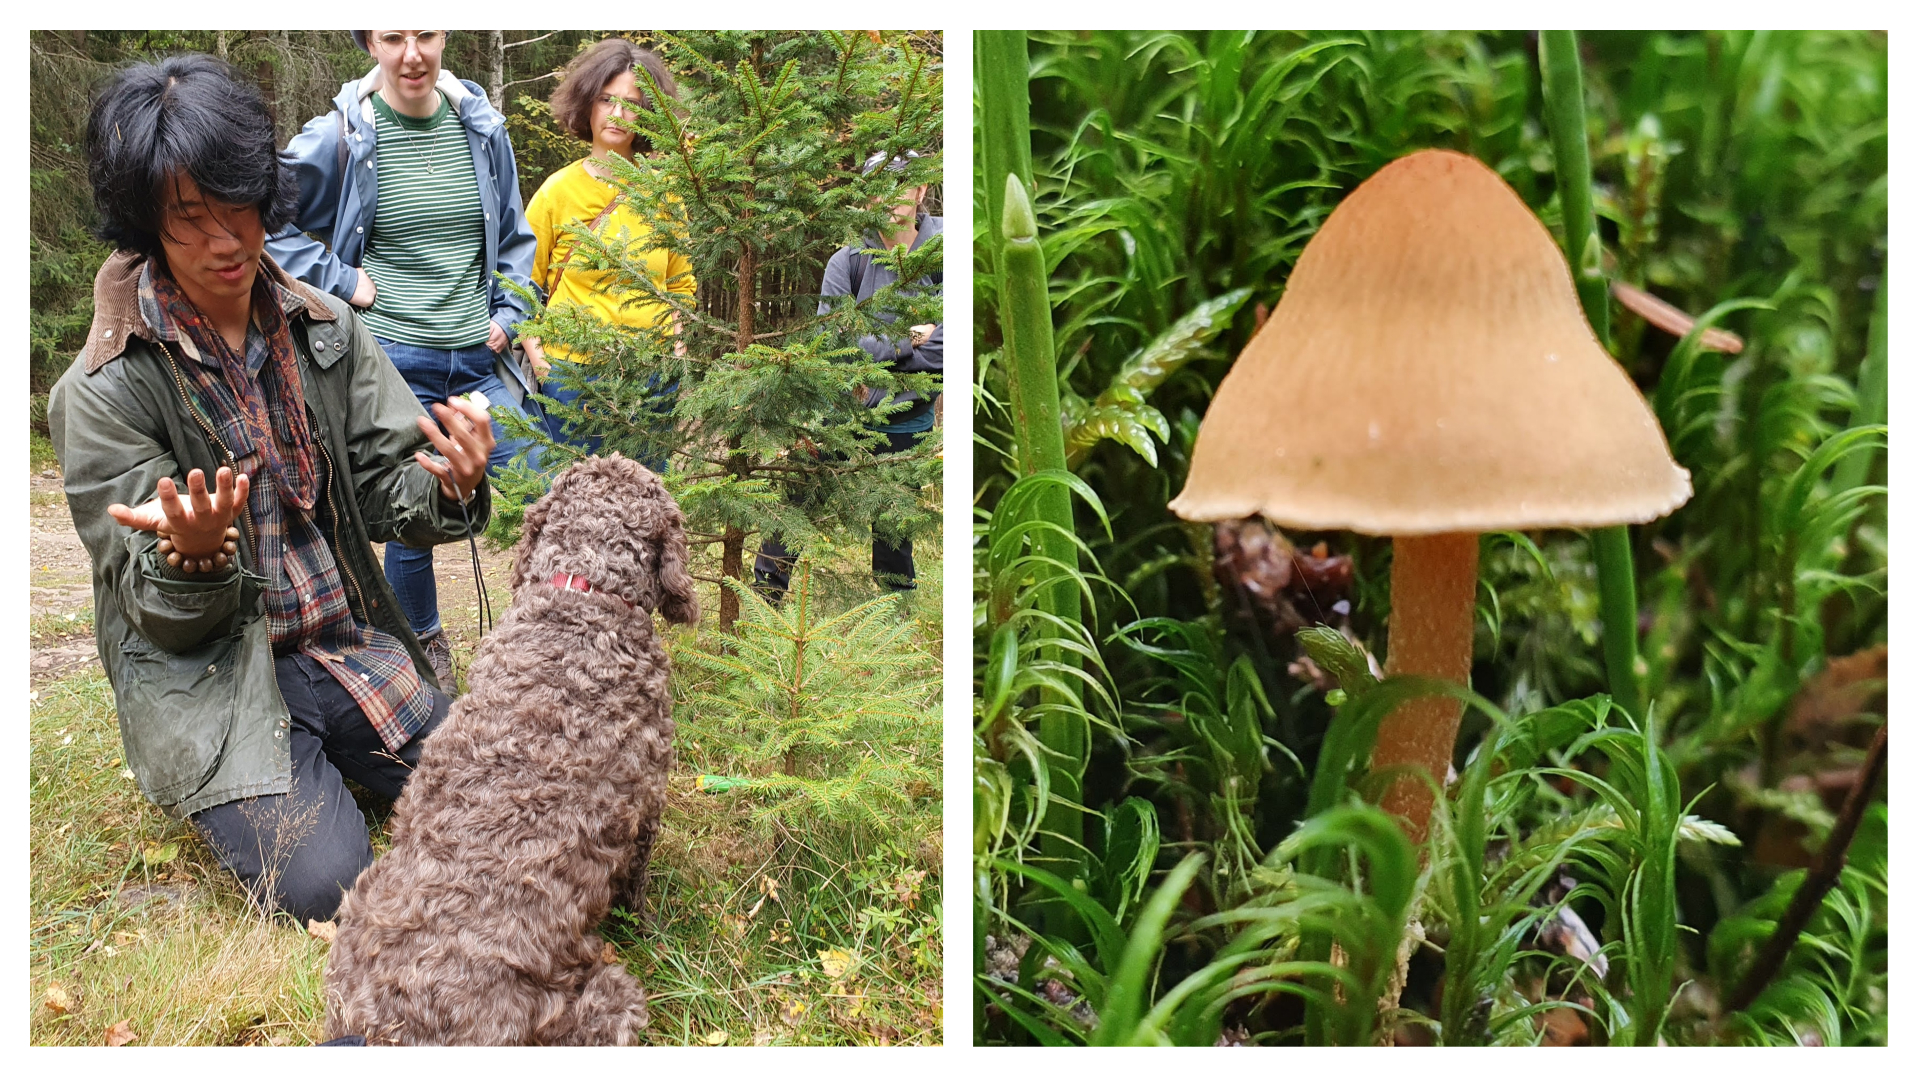 To the left: A picture of three people and a dog. To the right: Close-up photo of a fungus. 